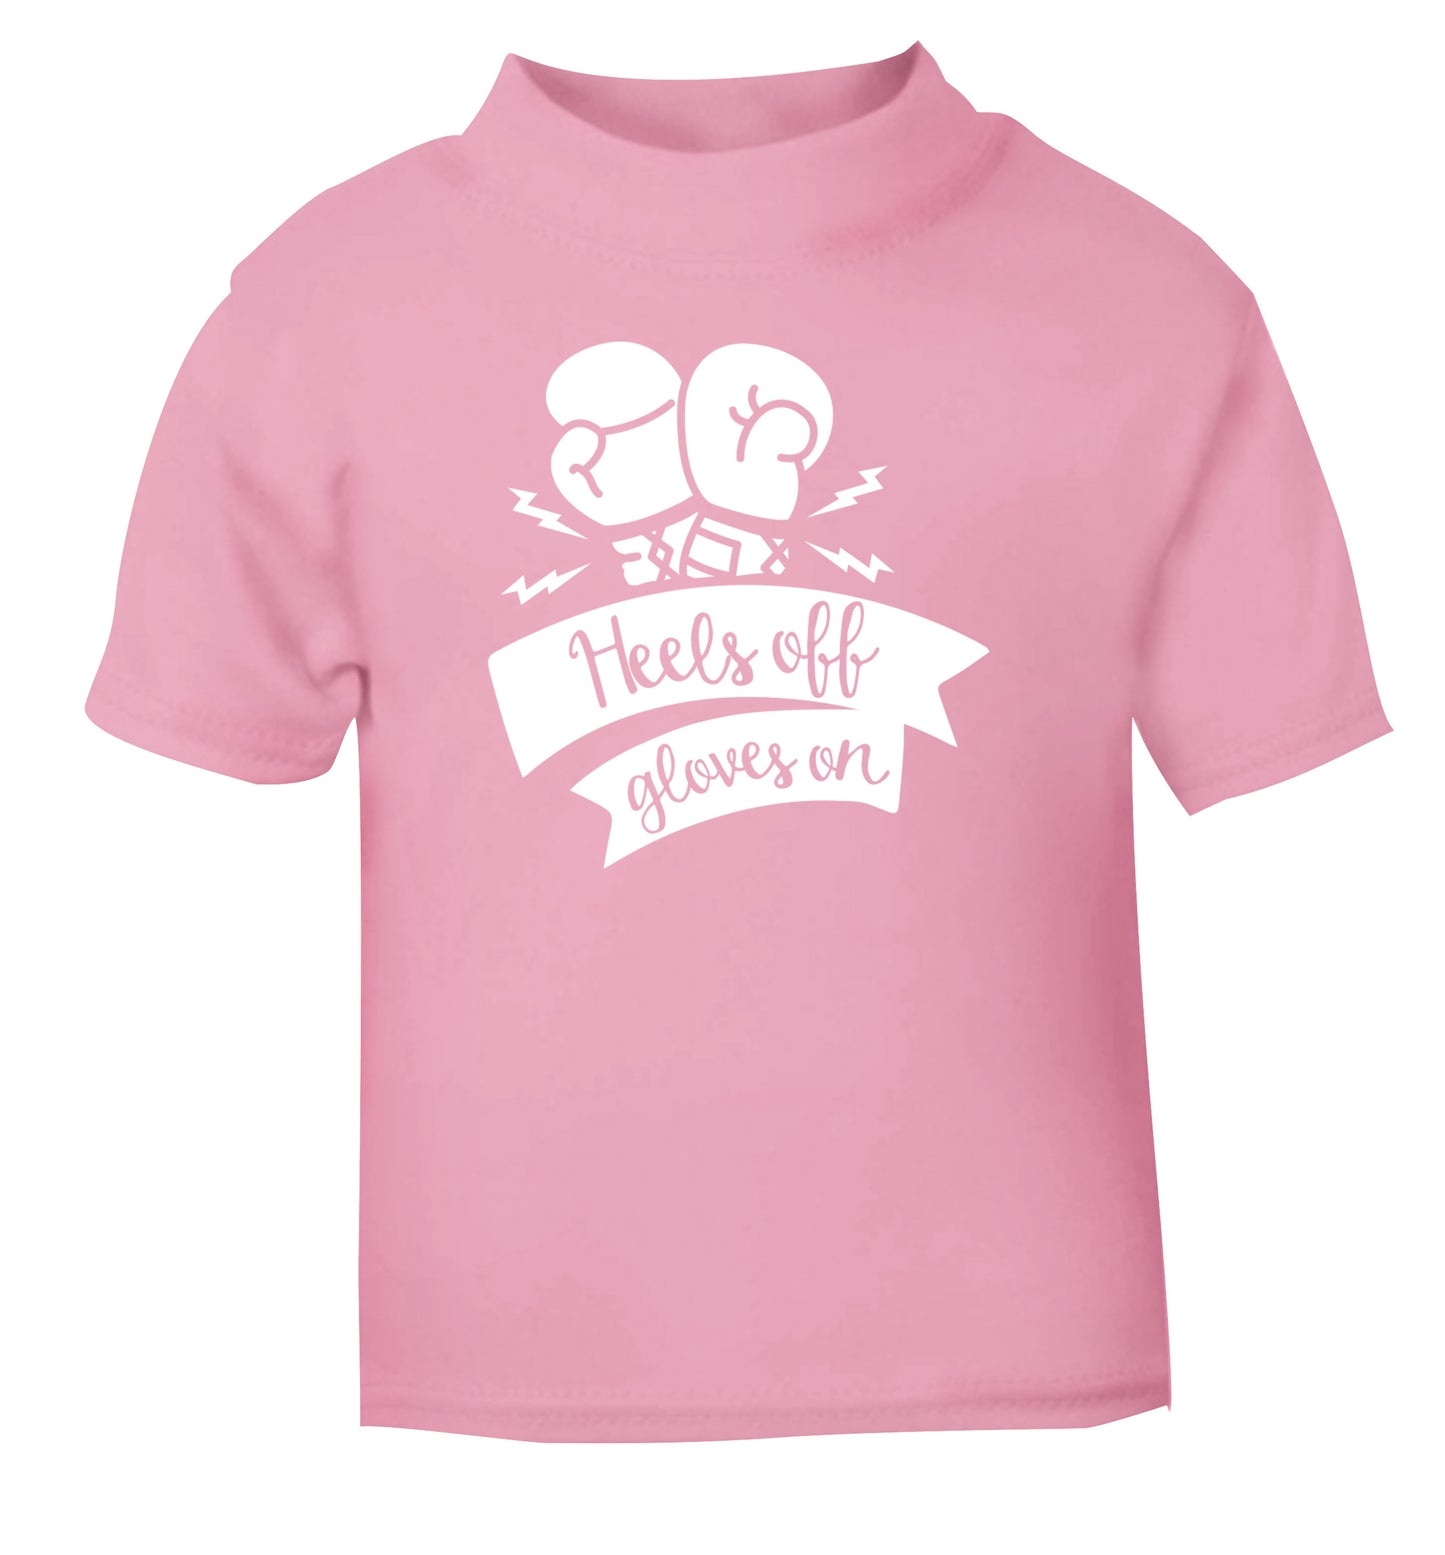 Heels off gloves on light pink Baby Toddler Tshirt 2 Years